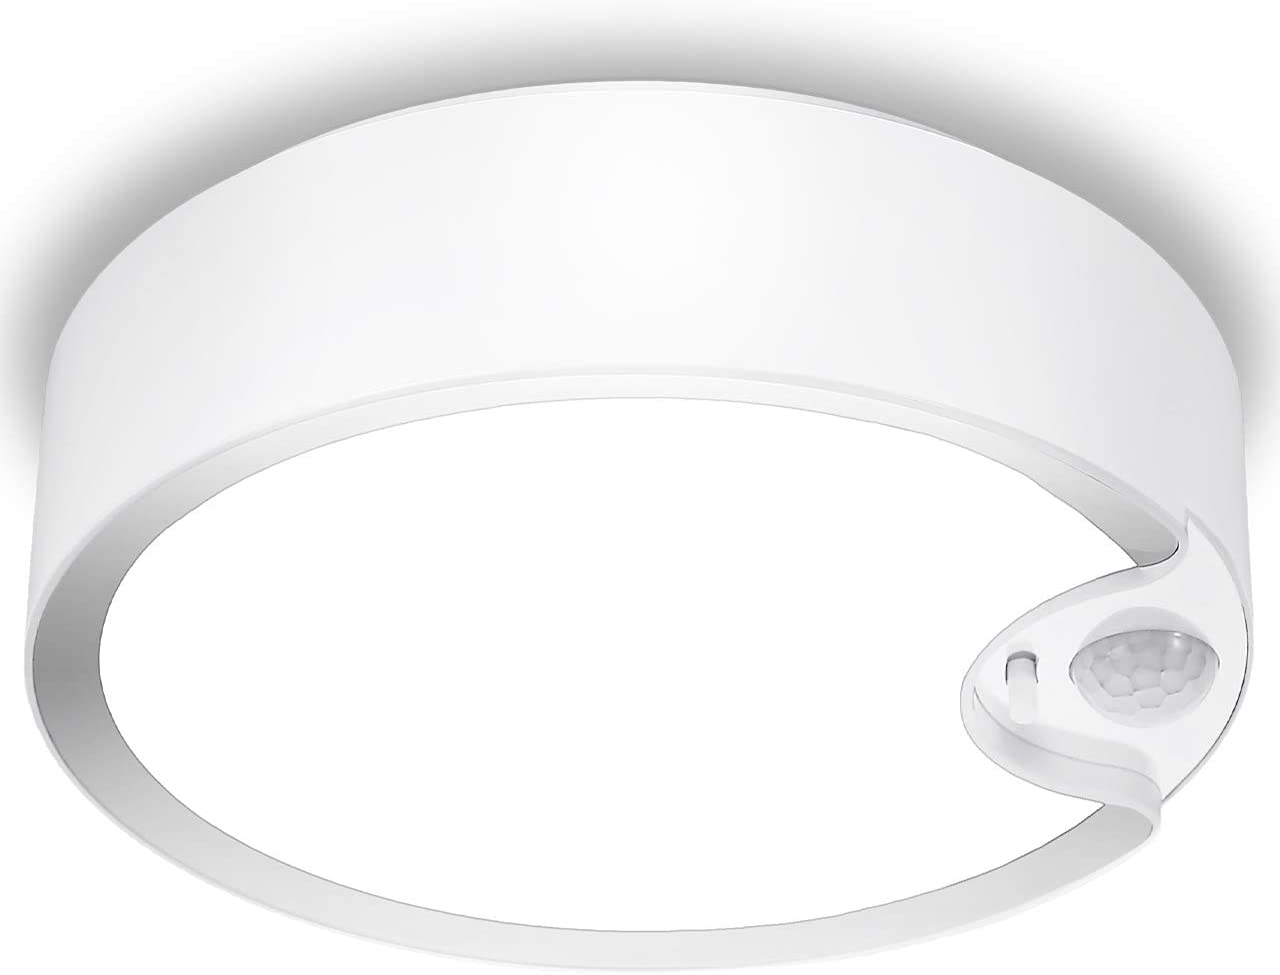 Veraa Motion Sensor Ceiling Light for Home with USB Charging